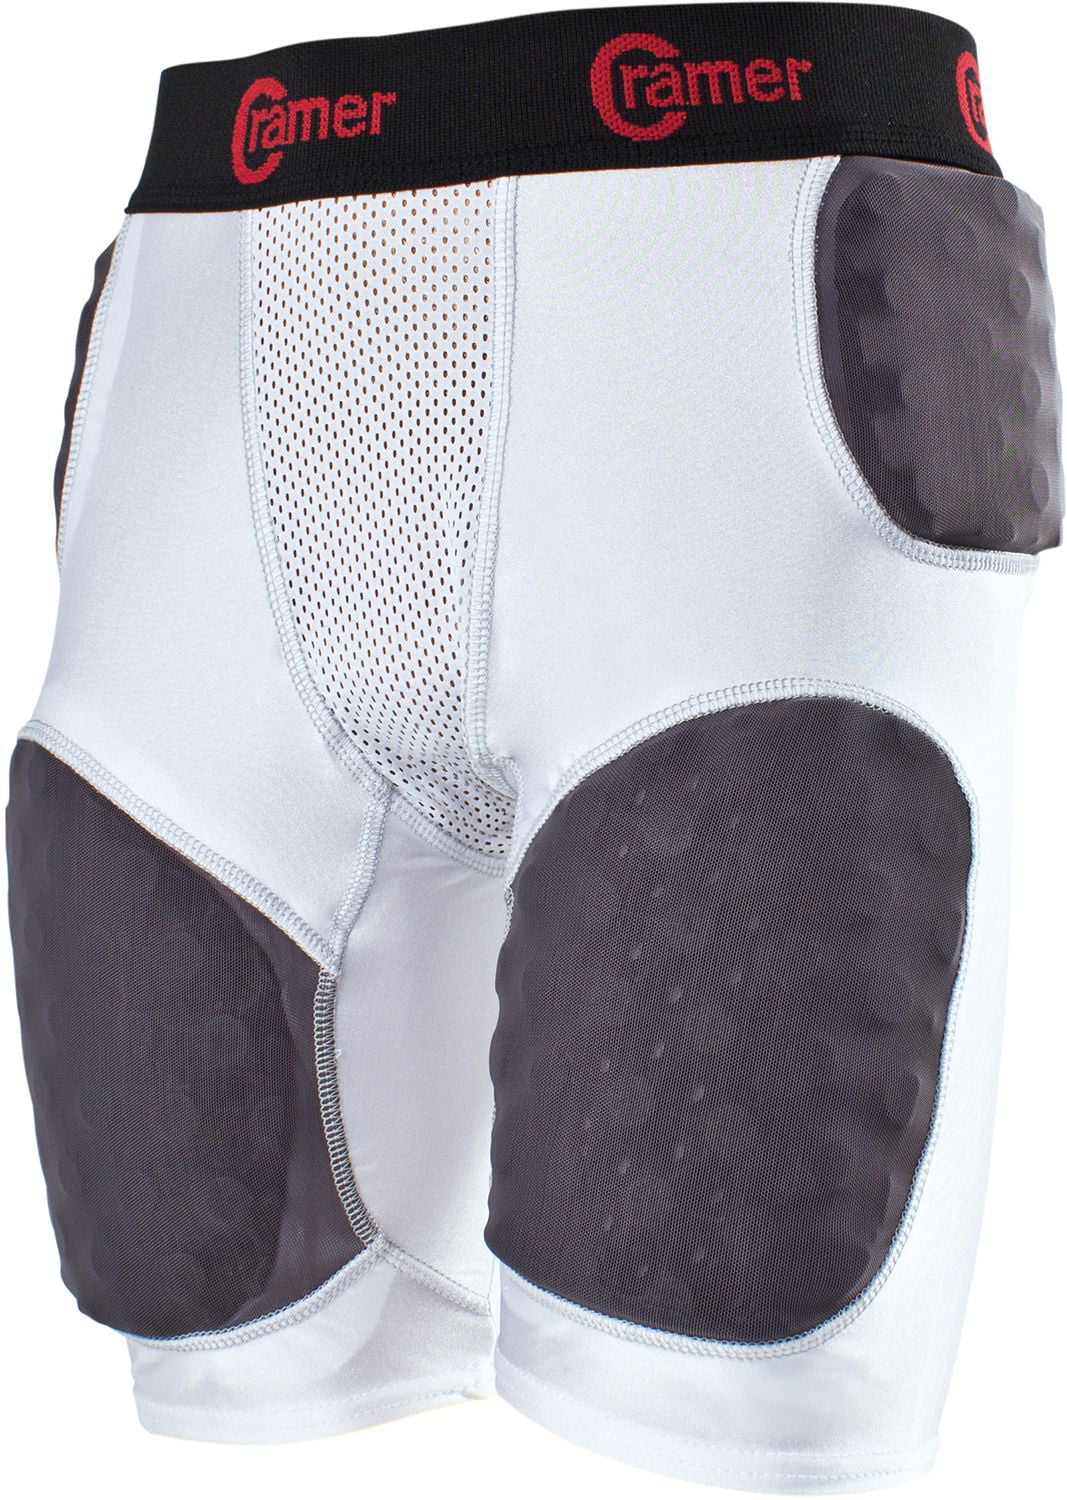 Tail And Thigh Pads Athletic Specialties Youth 5 Pocket Football Girdle With Sewn-In Hip X-Large